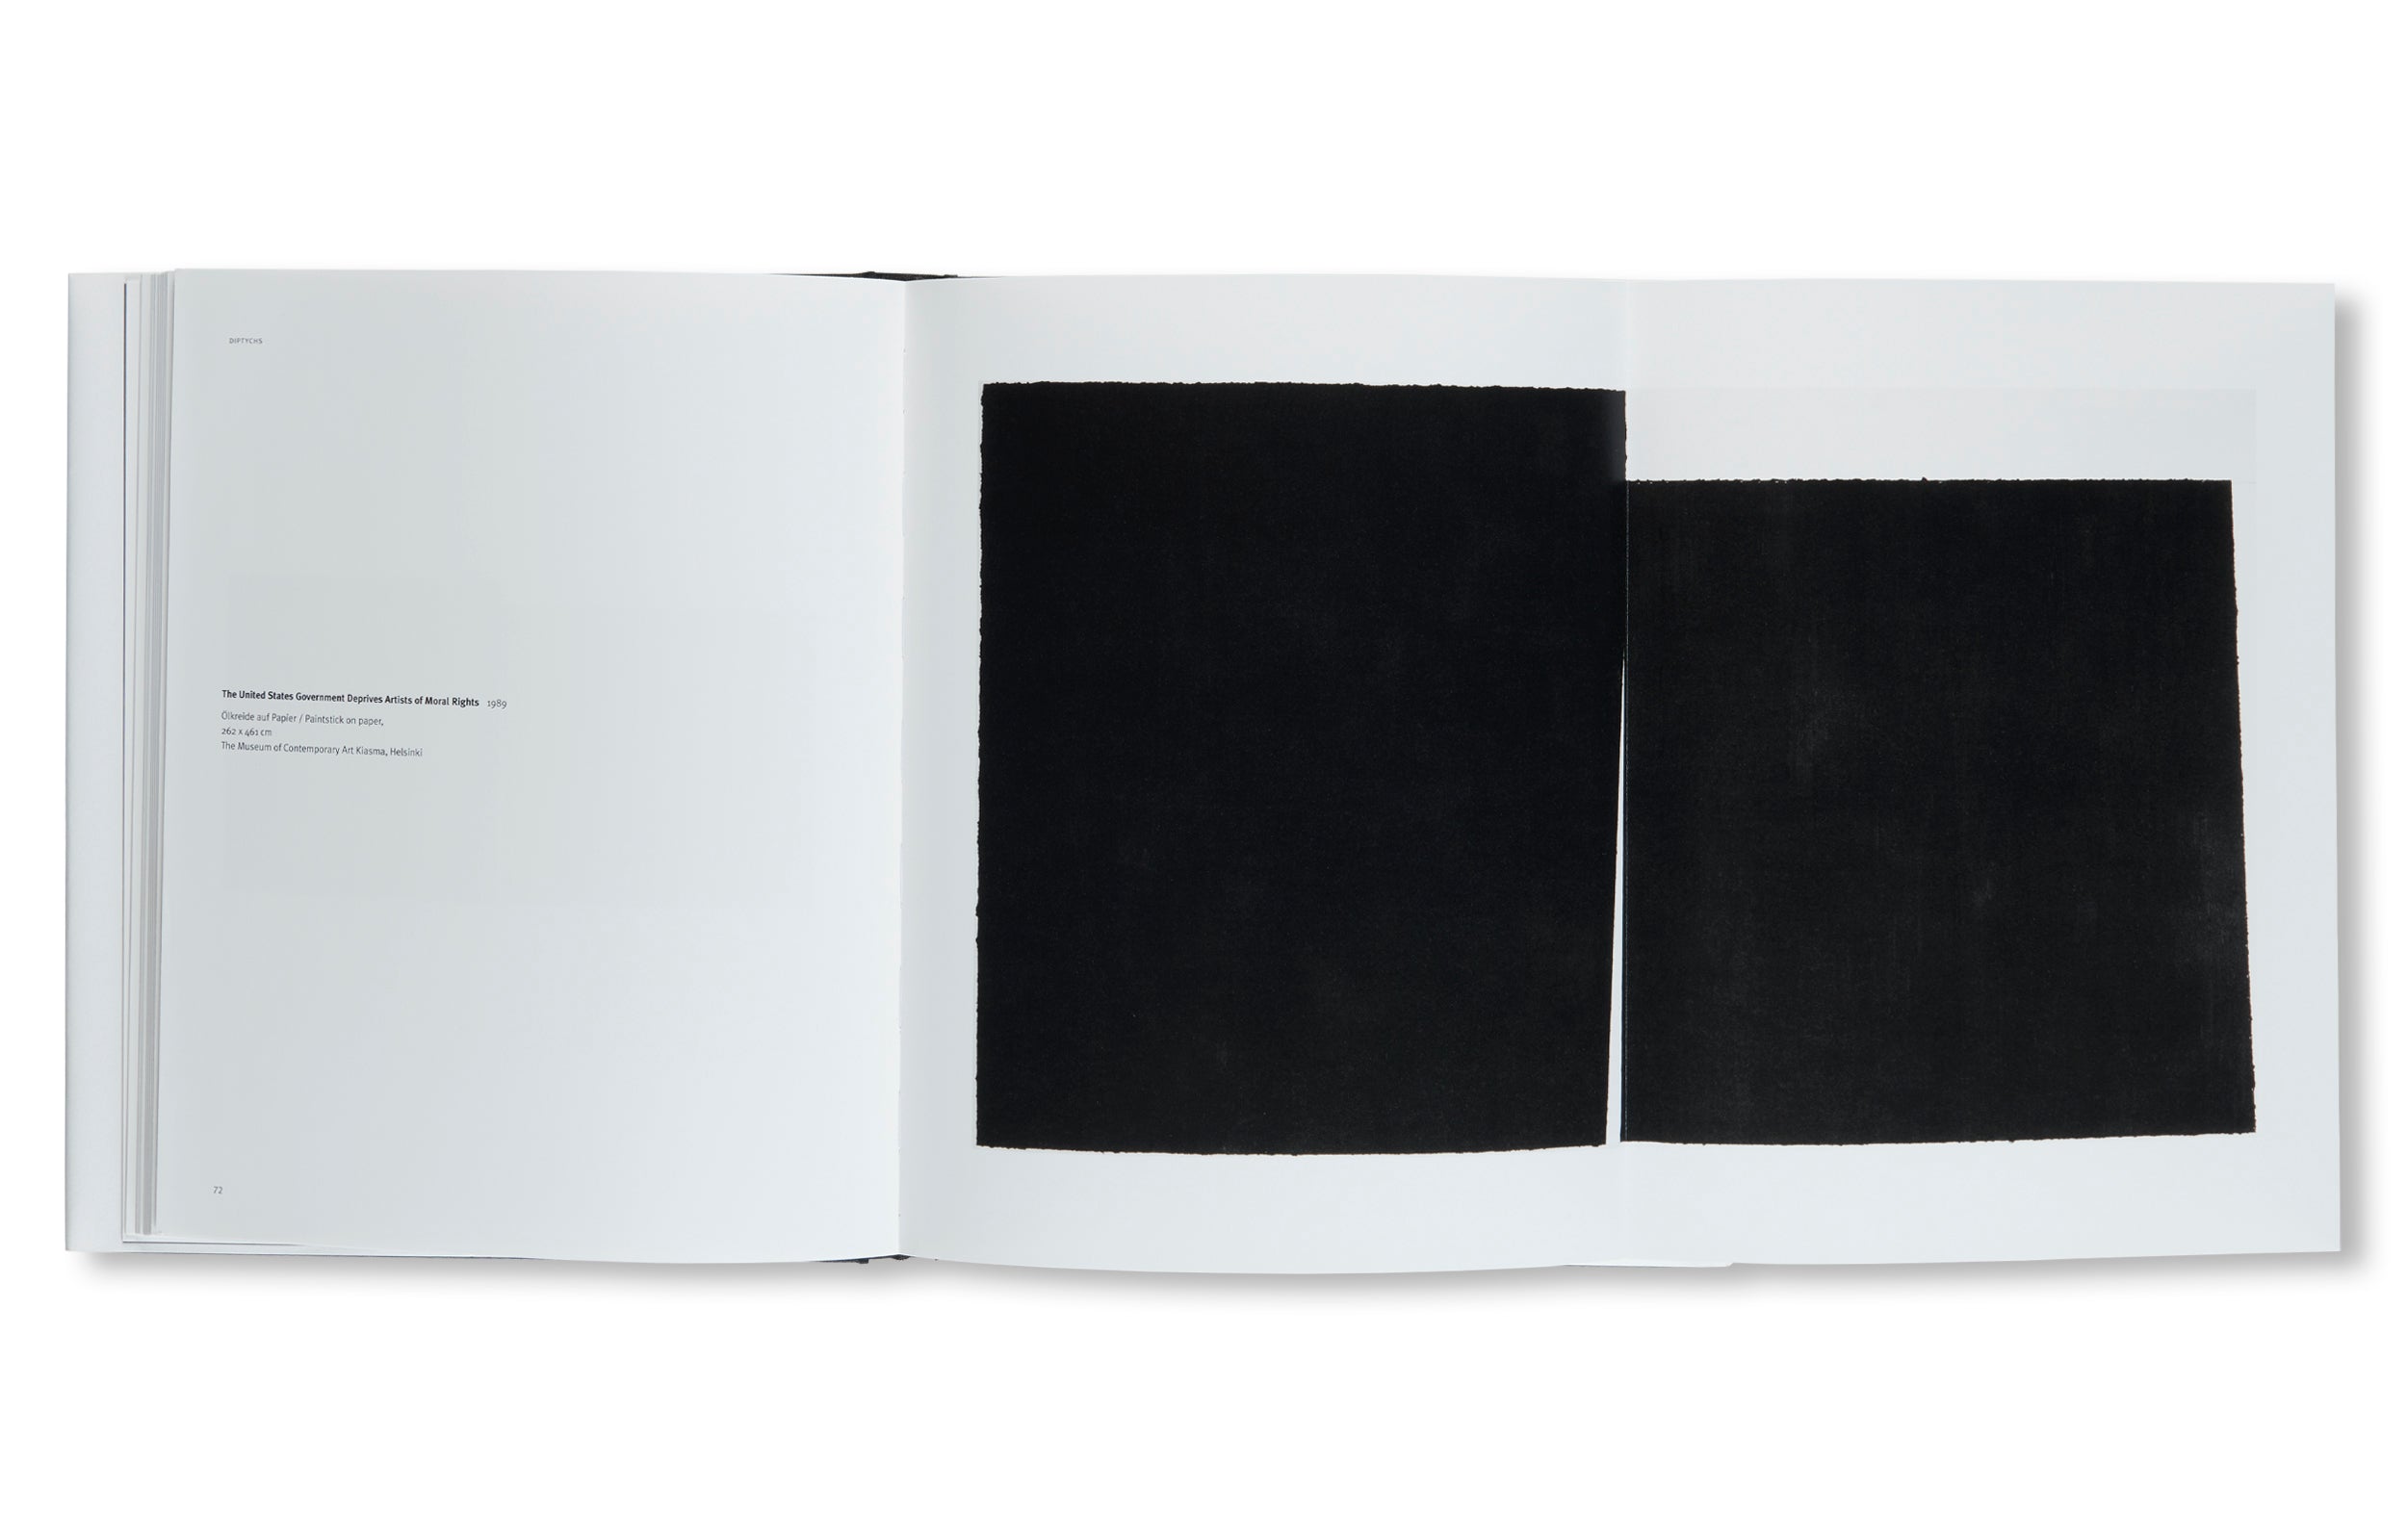 DRAWINGS WORK COMES OUT OF WORK by Richard Serra